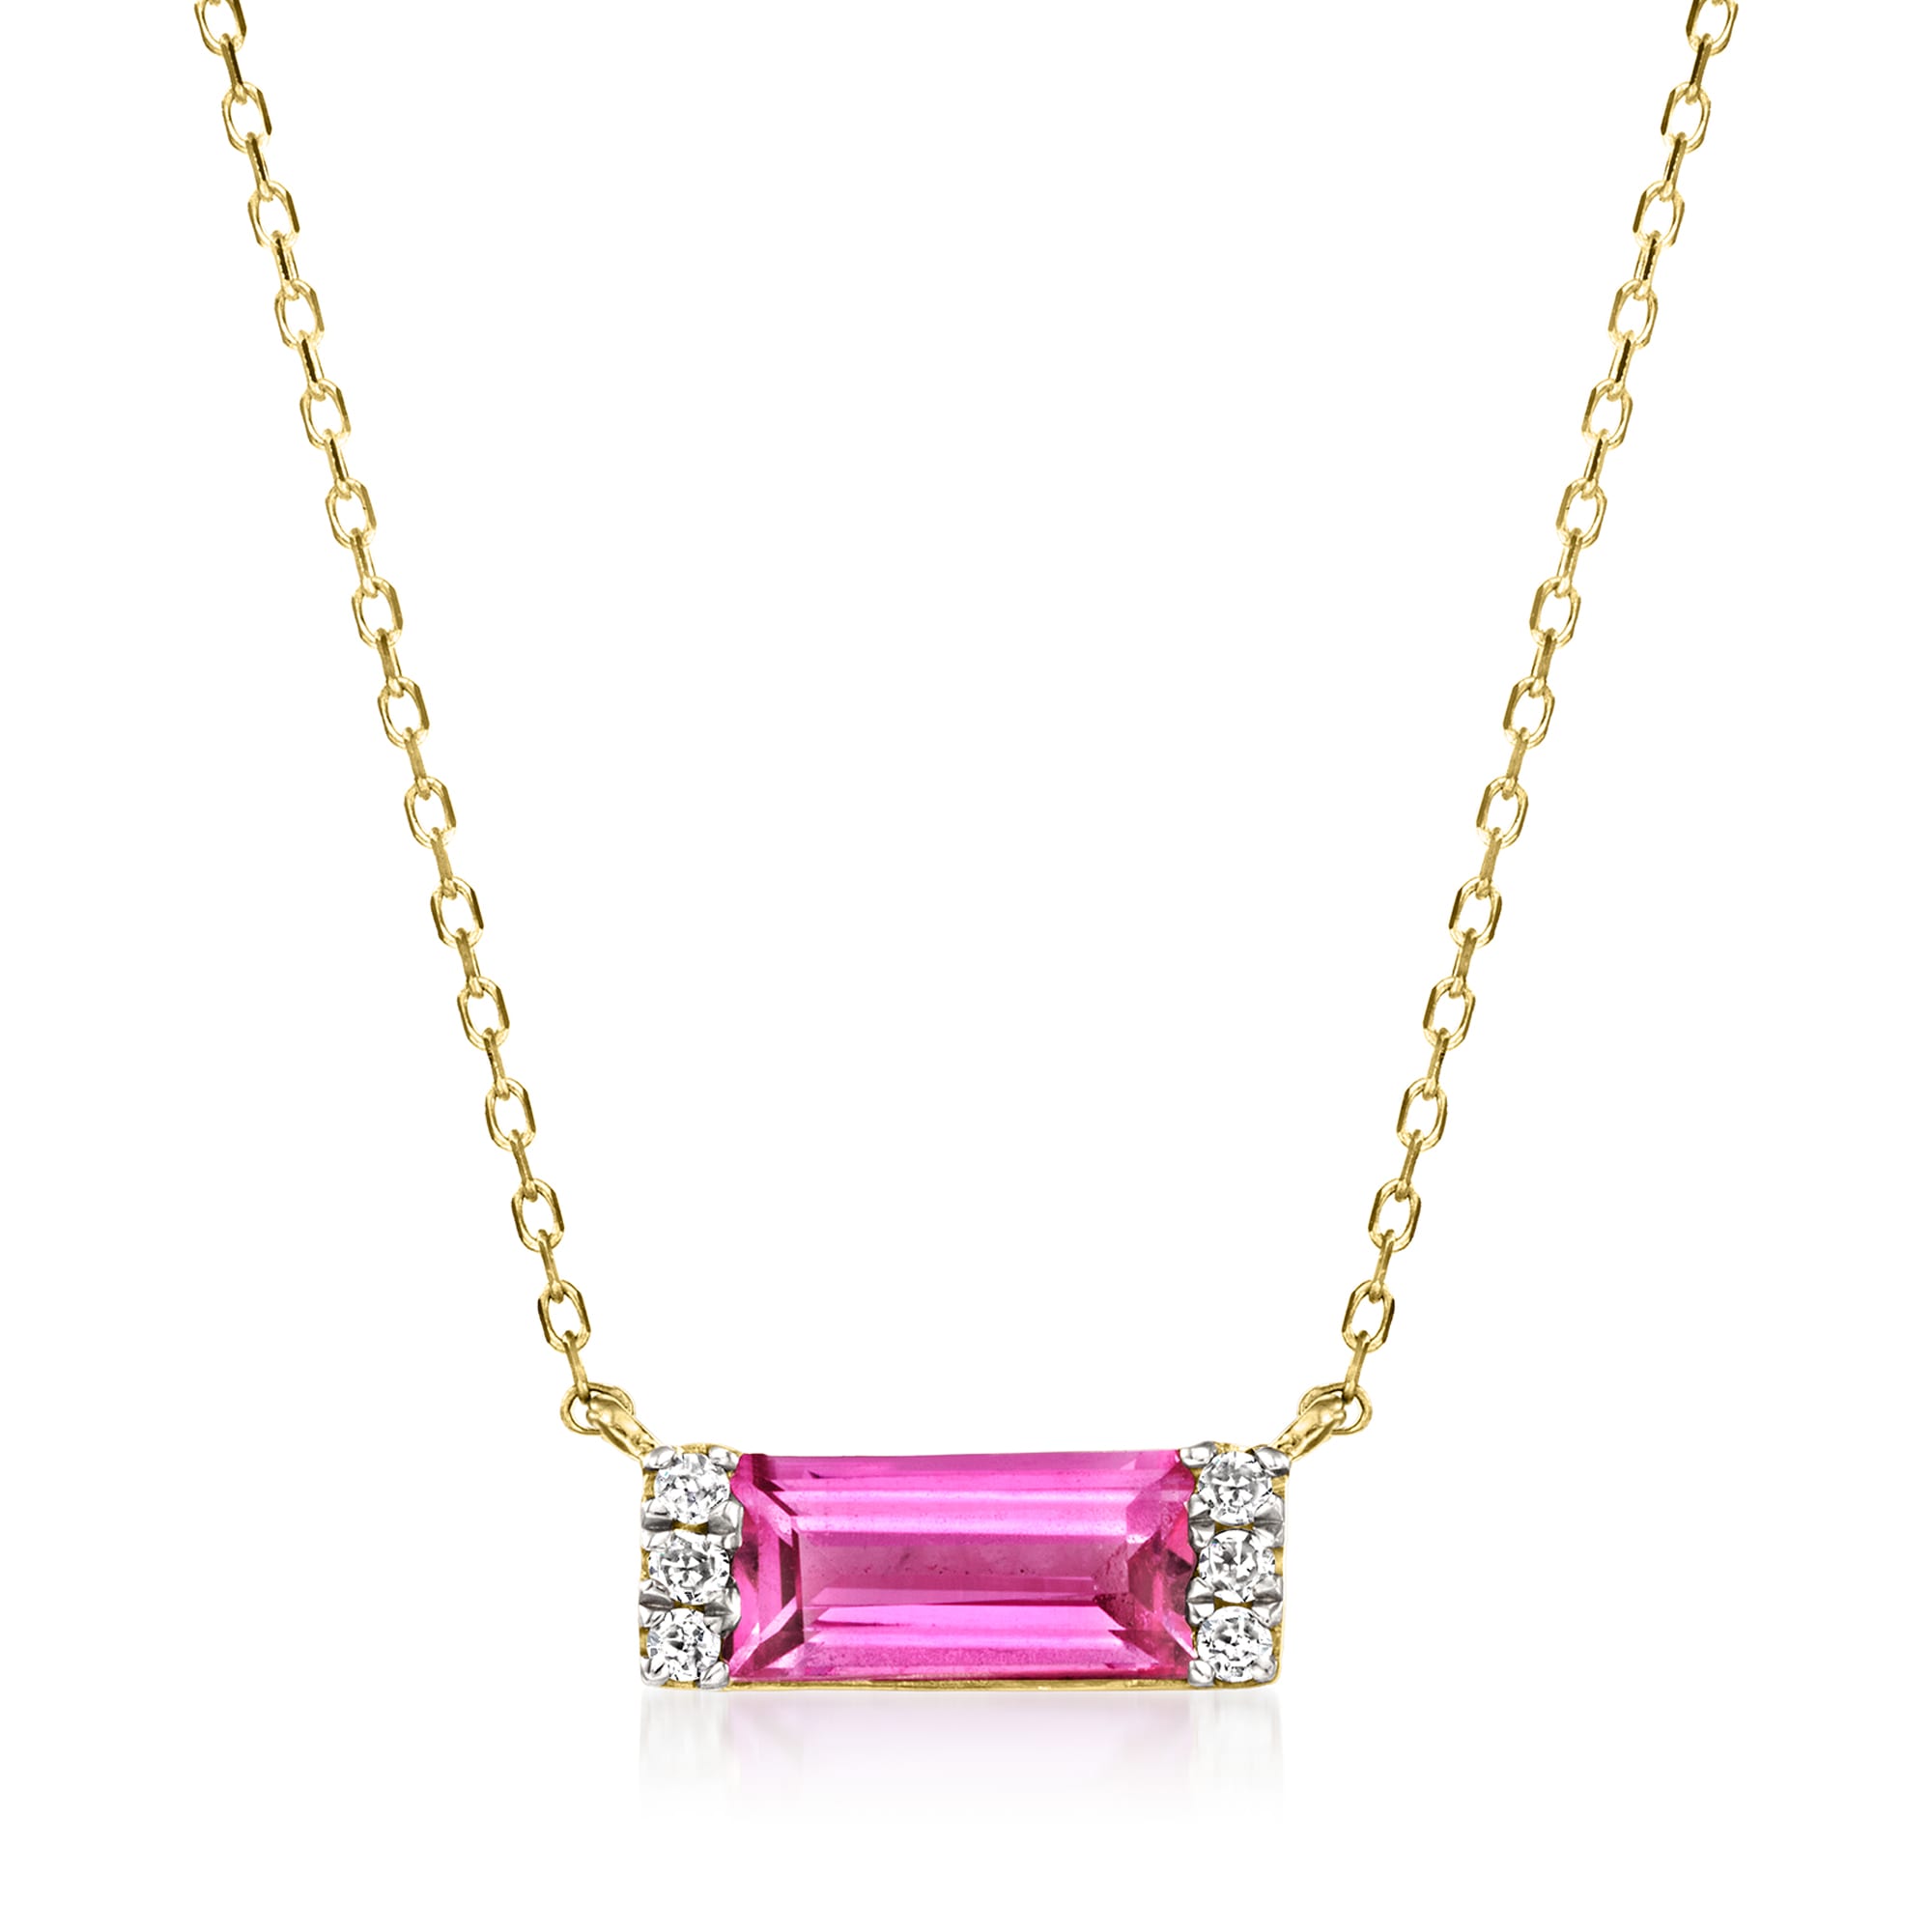 14k White Gold Pink Topaz (2 ct. t.w.) and Diamond Accent Pendant Necklace